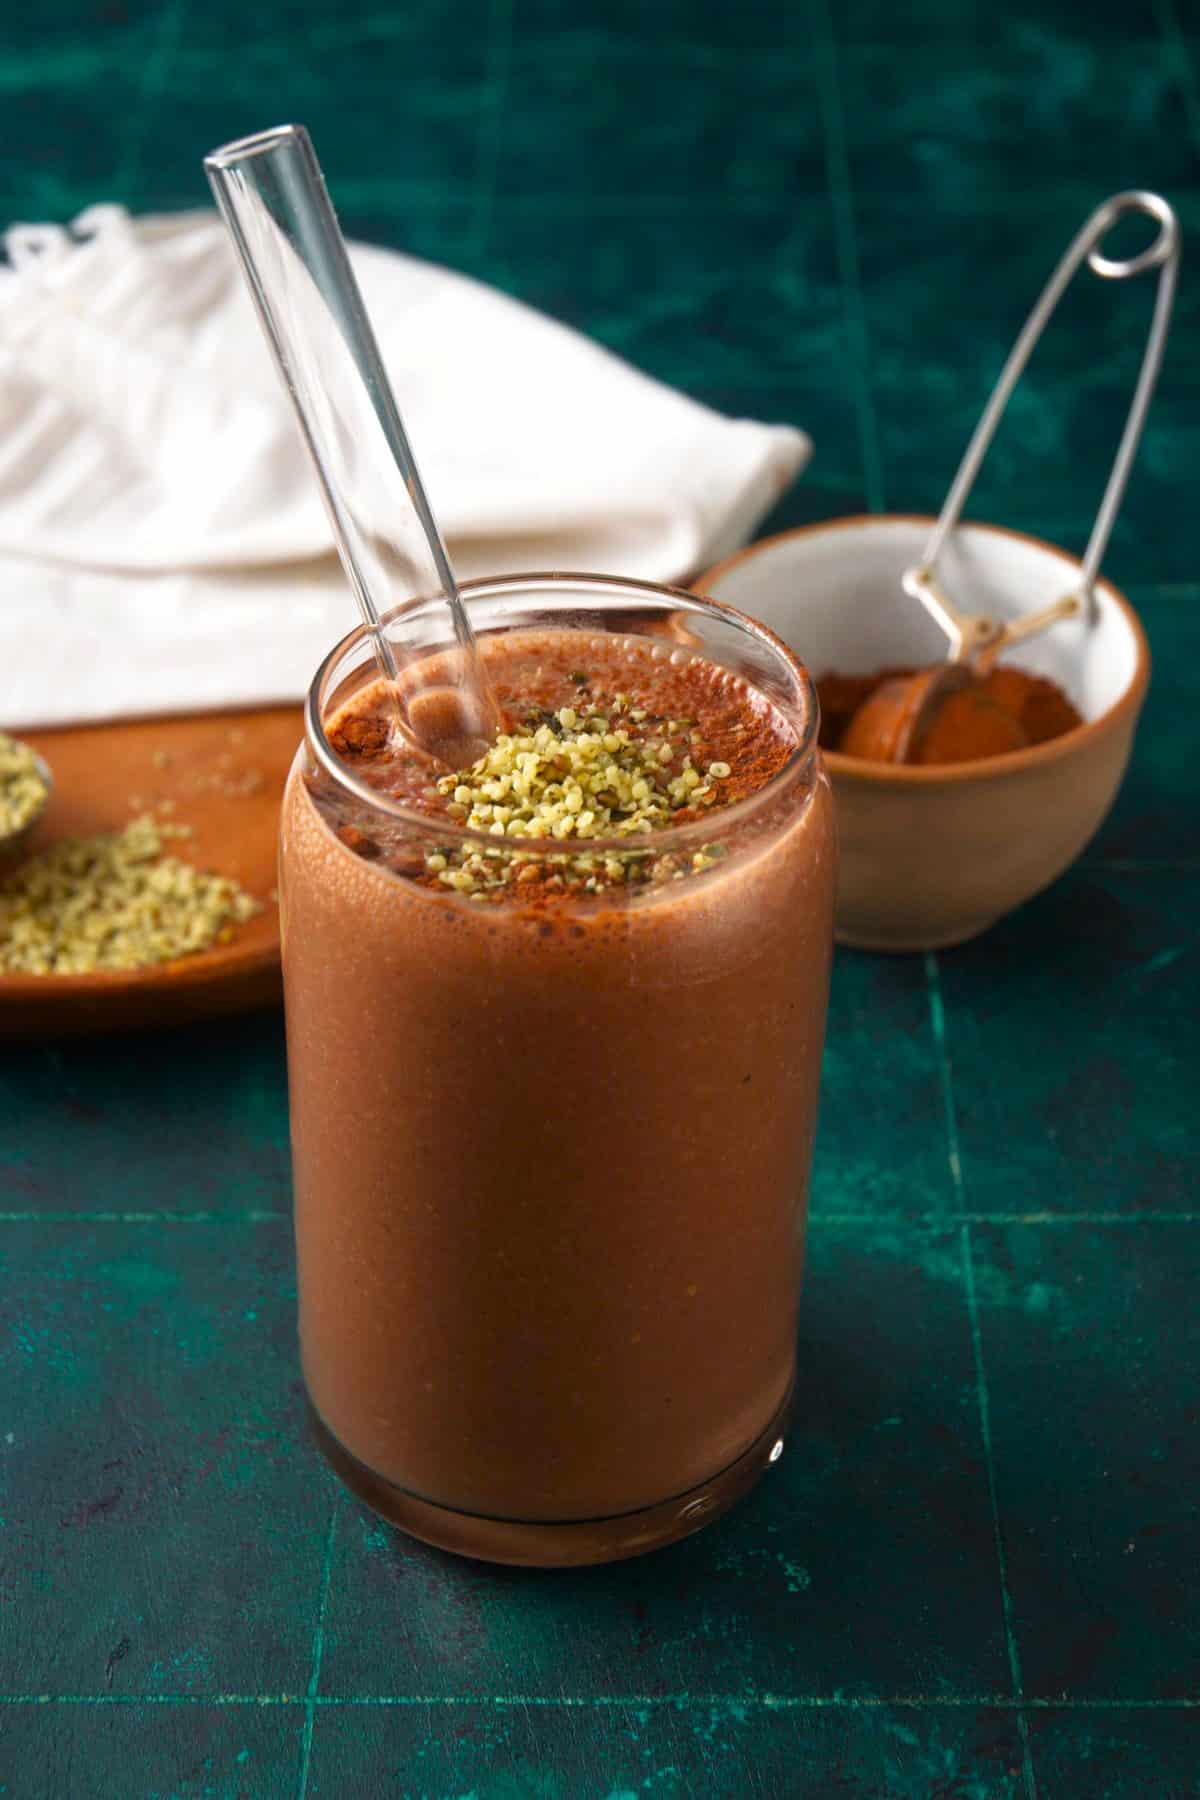 Chocolate peanut butter smoothie in glass with straw and topped with hemp seeds and cocoa powder on blue background.